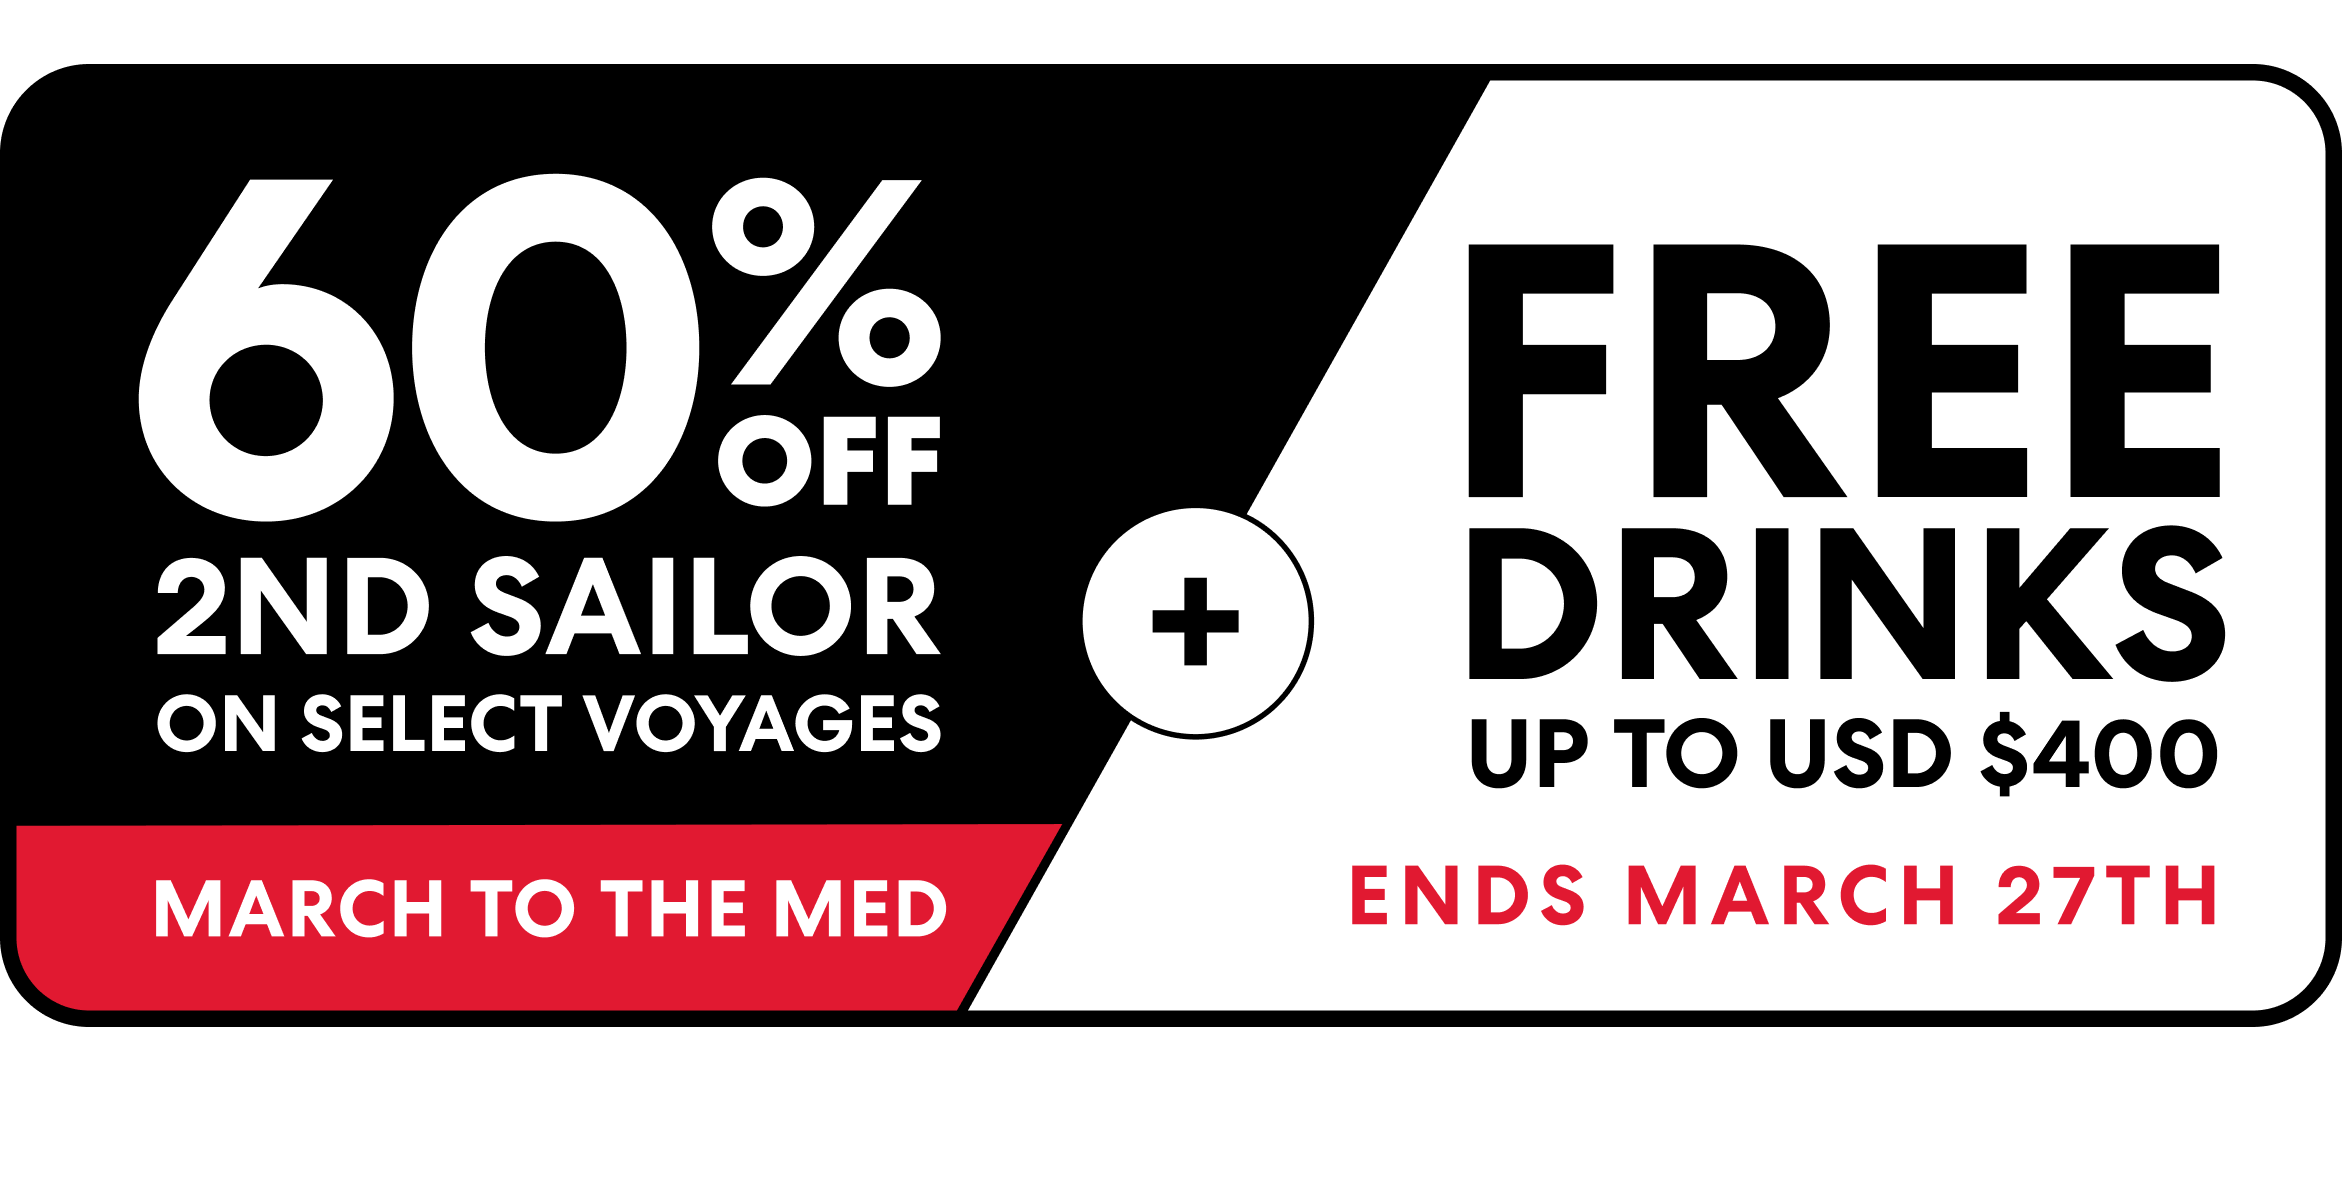 March to the Med. 60% Off 2nd Sailor on select voyages plus free drinks up to USD $400. Ends March 27th.